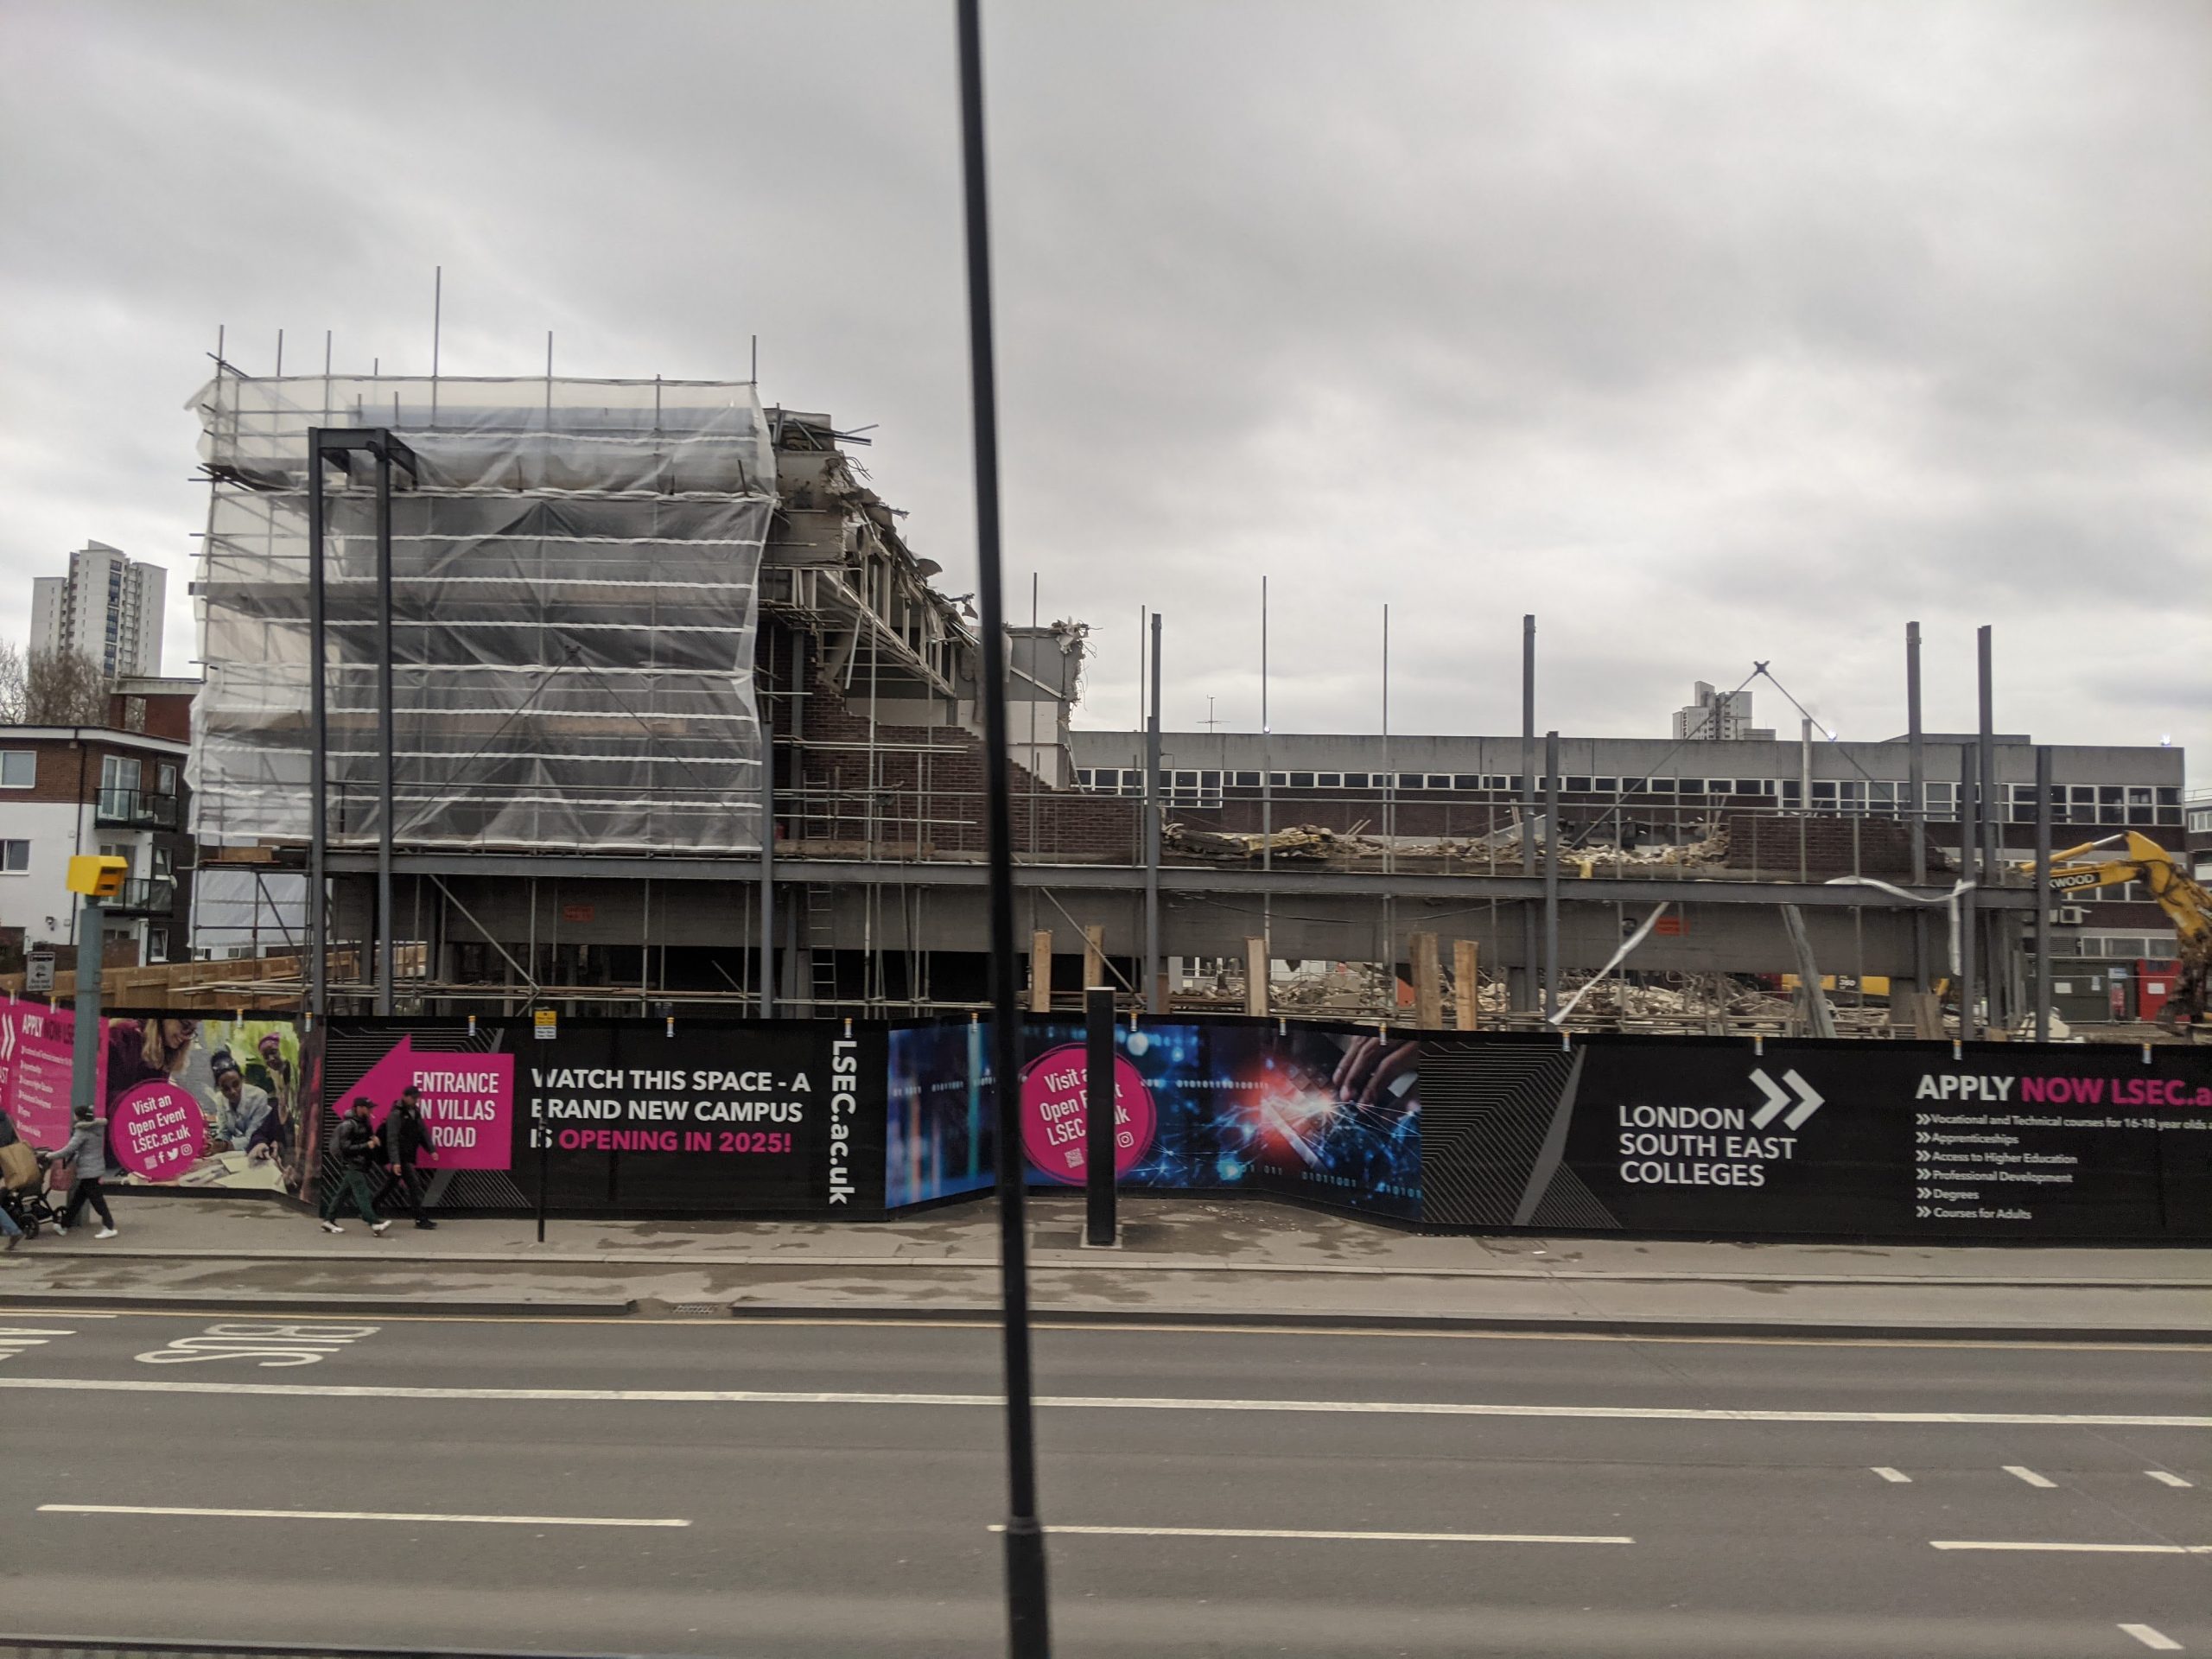 plumstead-college-comes-down-as-redevelopment-moves-ahead-murky-depths